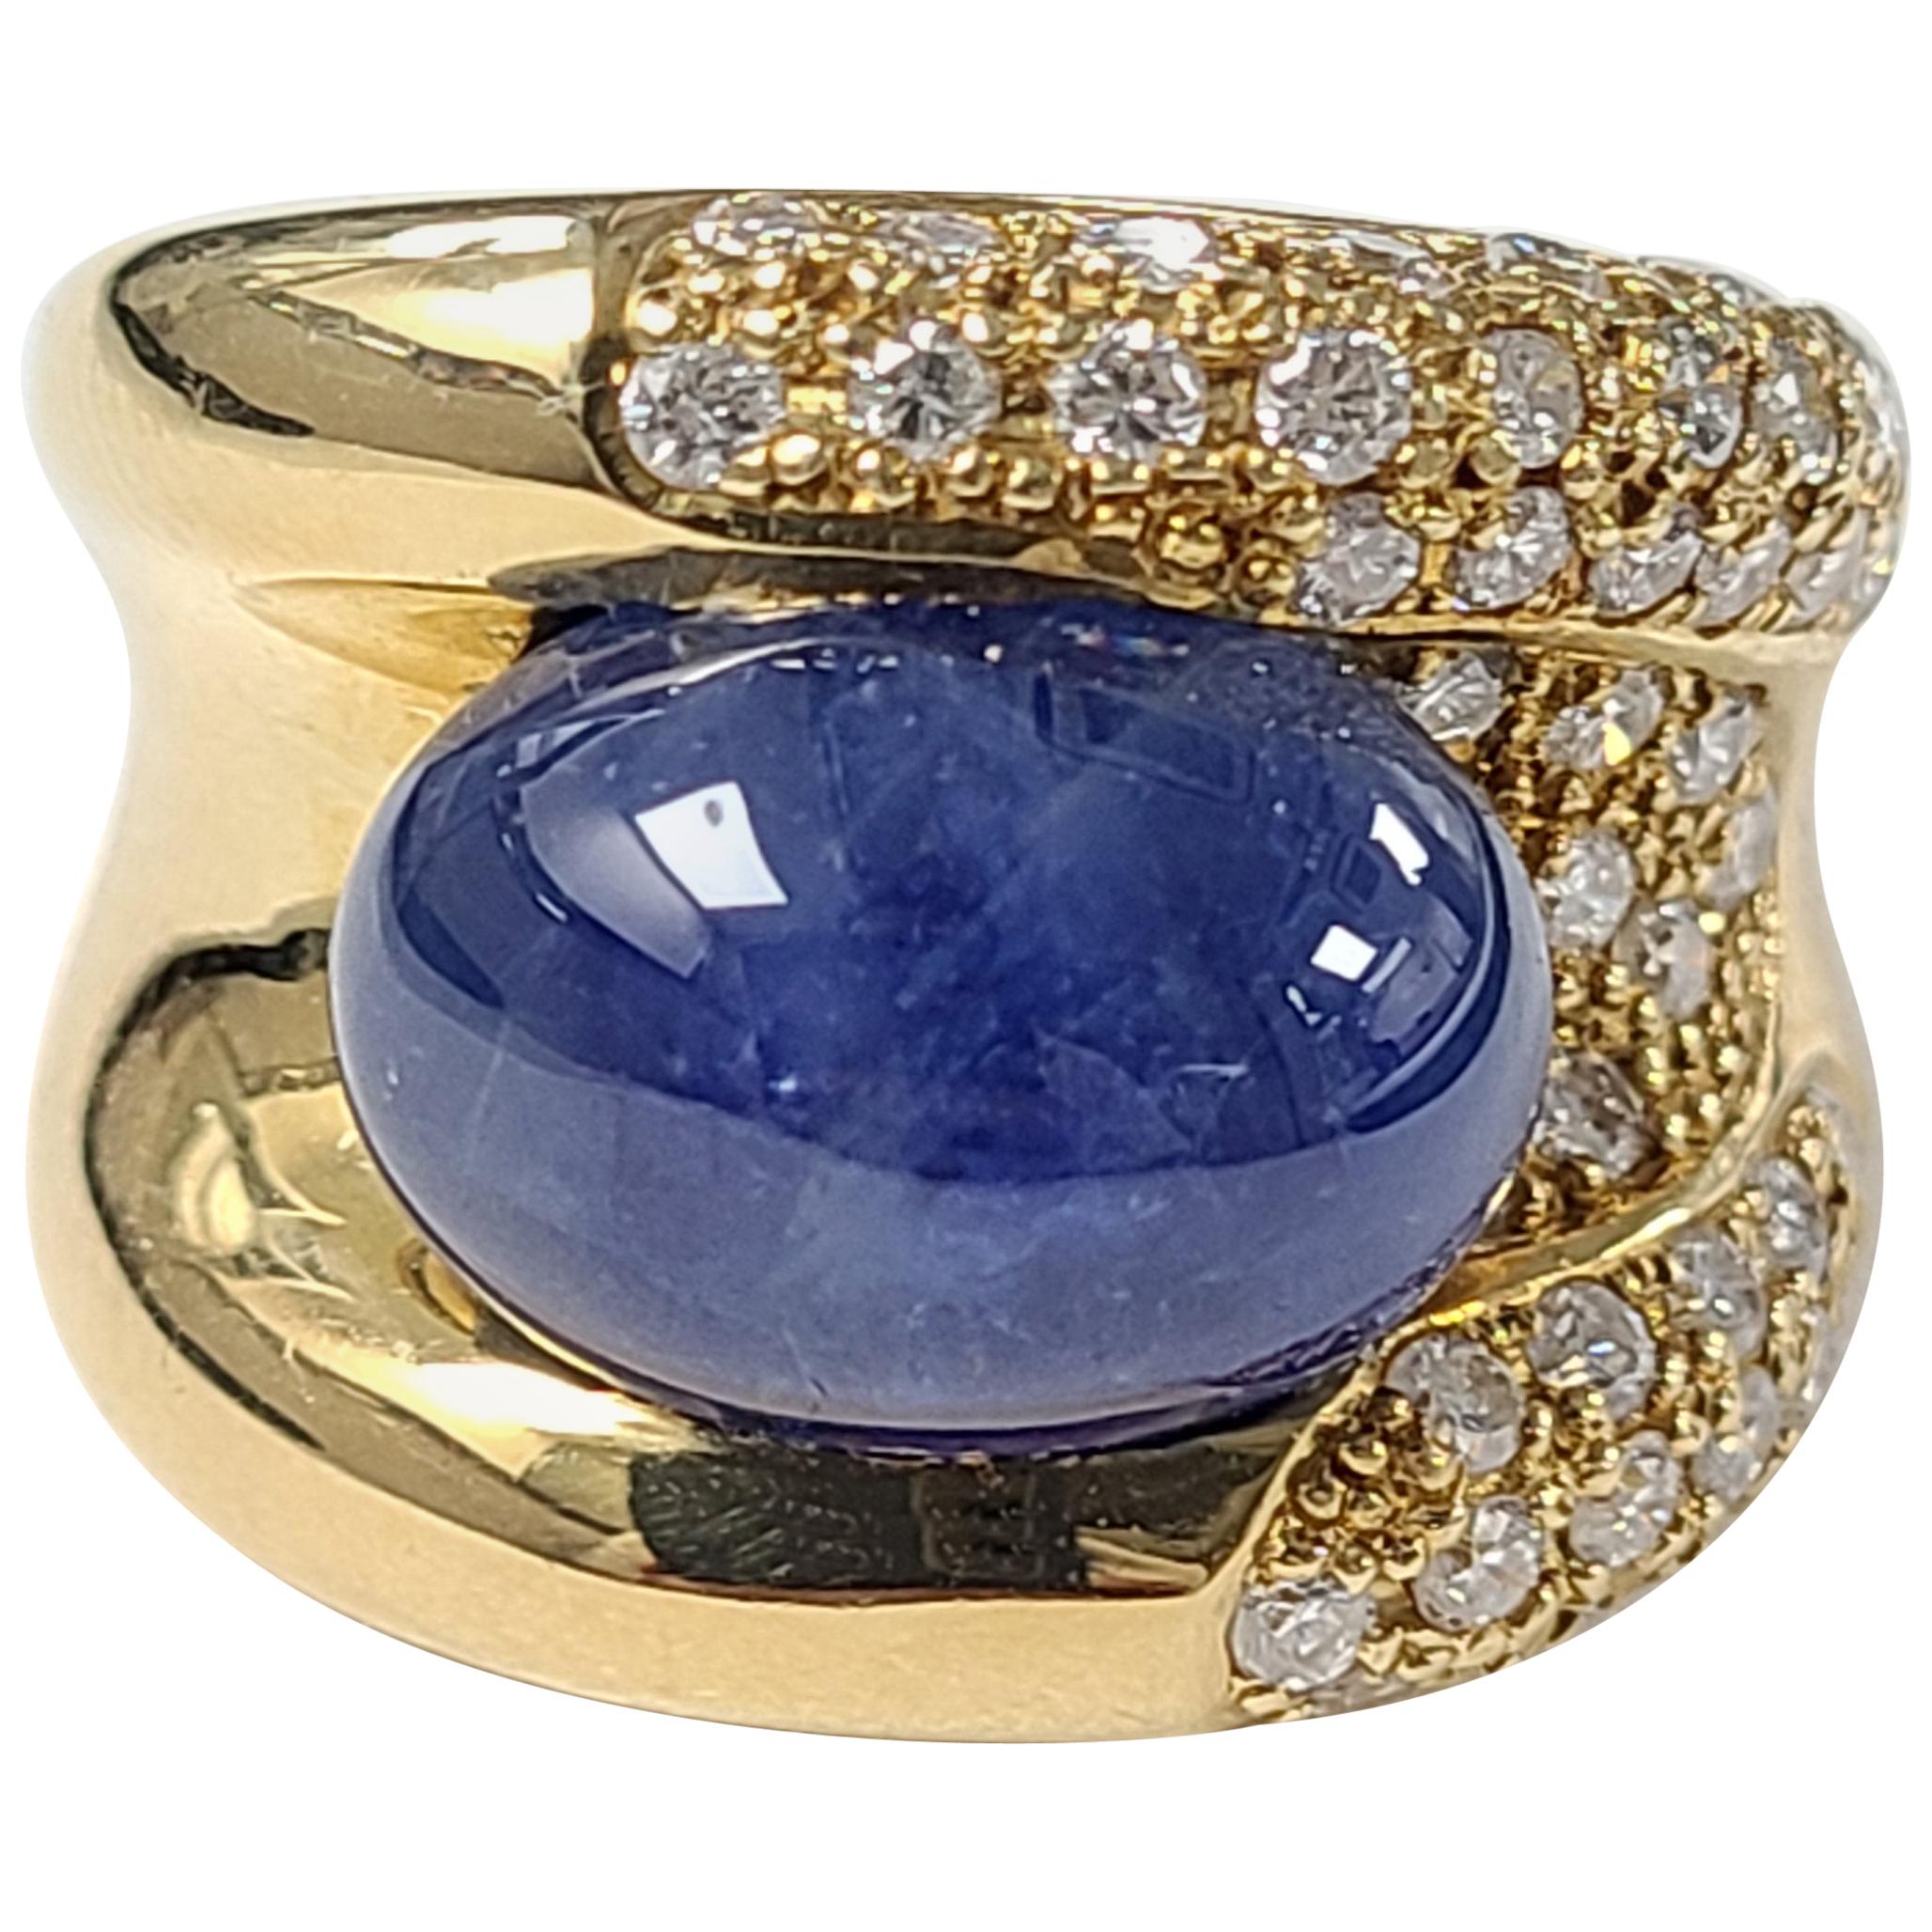 An Elegant ring set in 18k gold with blue sapphire cabochon and diamonds . the blue sapphire weight is 11.16 carats and diamond weight is 1.06 carats . The ring dimensions in cm 1.5 x 2.2 x 2.4 ( L X W X H ). US size 6